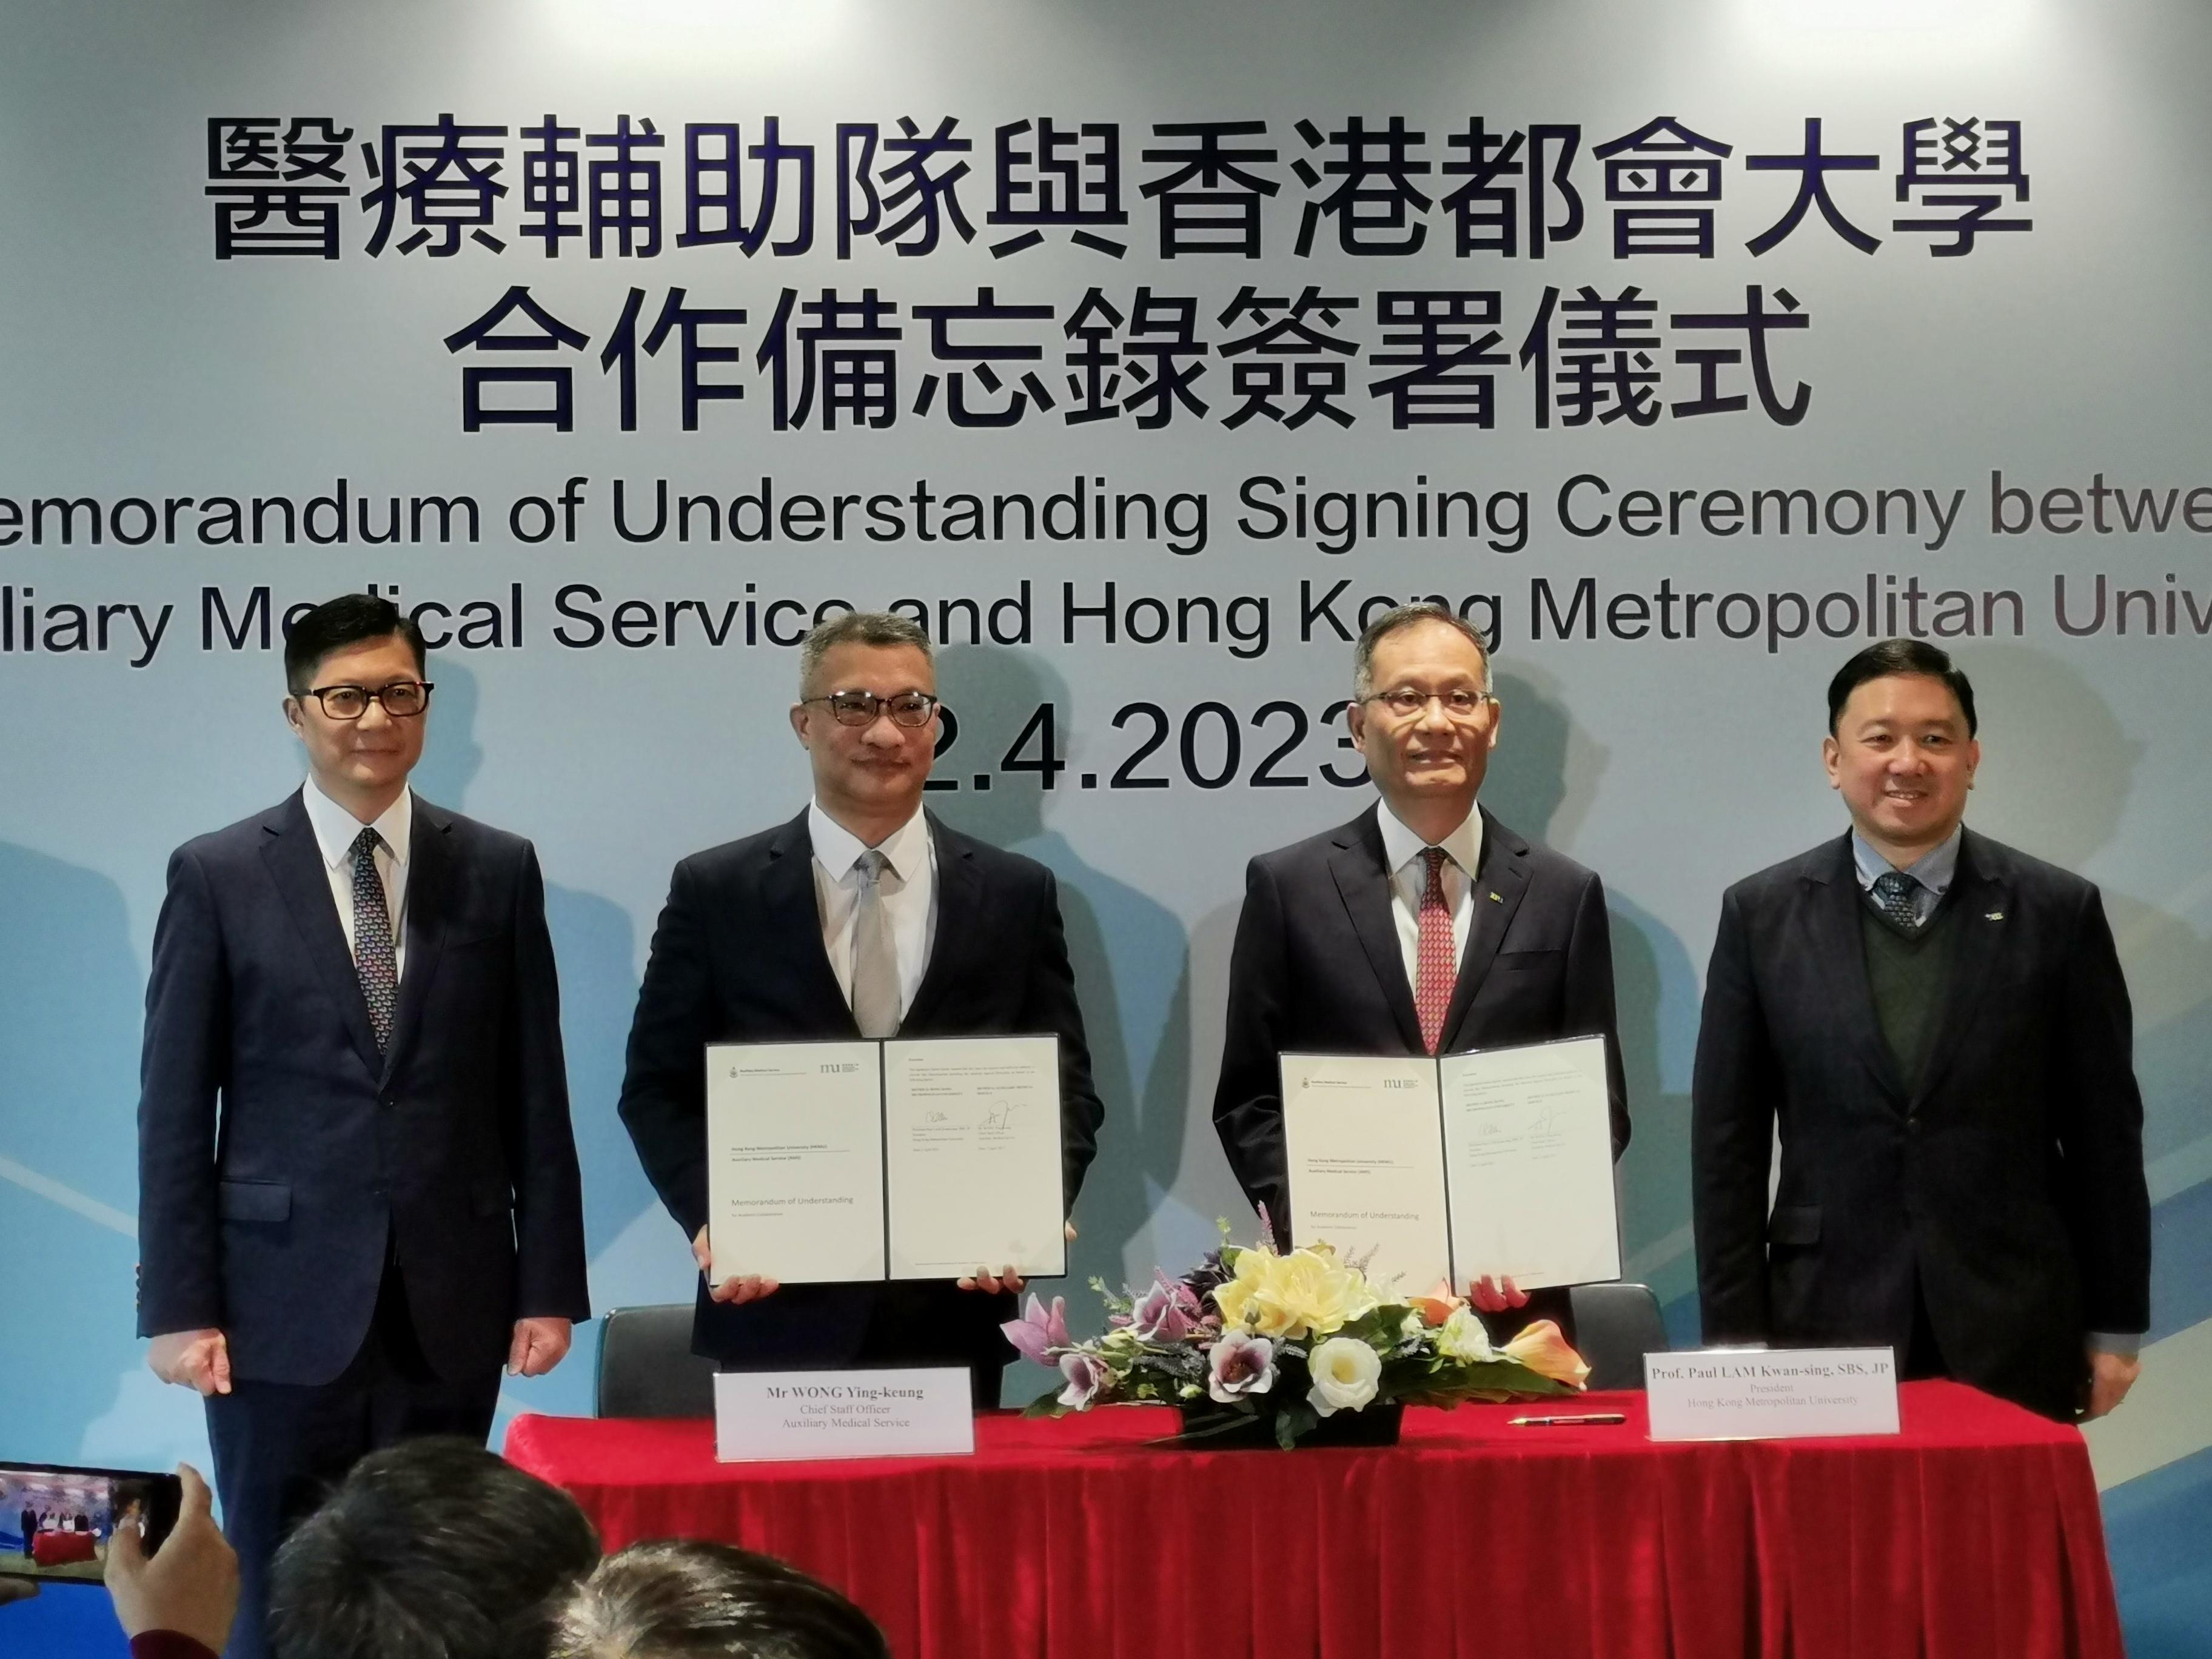 The Auxiliary Medical Service (AMS) and the Hong Kong Metropolitan University (HKMU) signed a Memorandum of Understanding (MoU) today (April 2) to officially launch a series of academic and service collaborations, with a view to nurturing more talents for Hong Kong. The MoU was signed by the Chief Staff Officer of the AMS, Mr Wong Ying-keung (second left), and the President of the HKMU, Professor Paul Lam (second right), and witnessed by the Secretary for Security, Mr Tang Ping-keung (first left), and the Council Chairman of the HKMU, Dr Conrad Wong (first right).